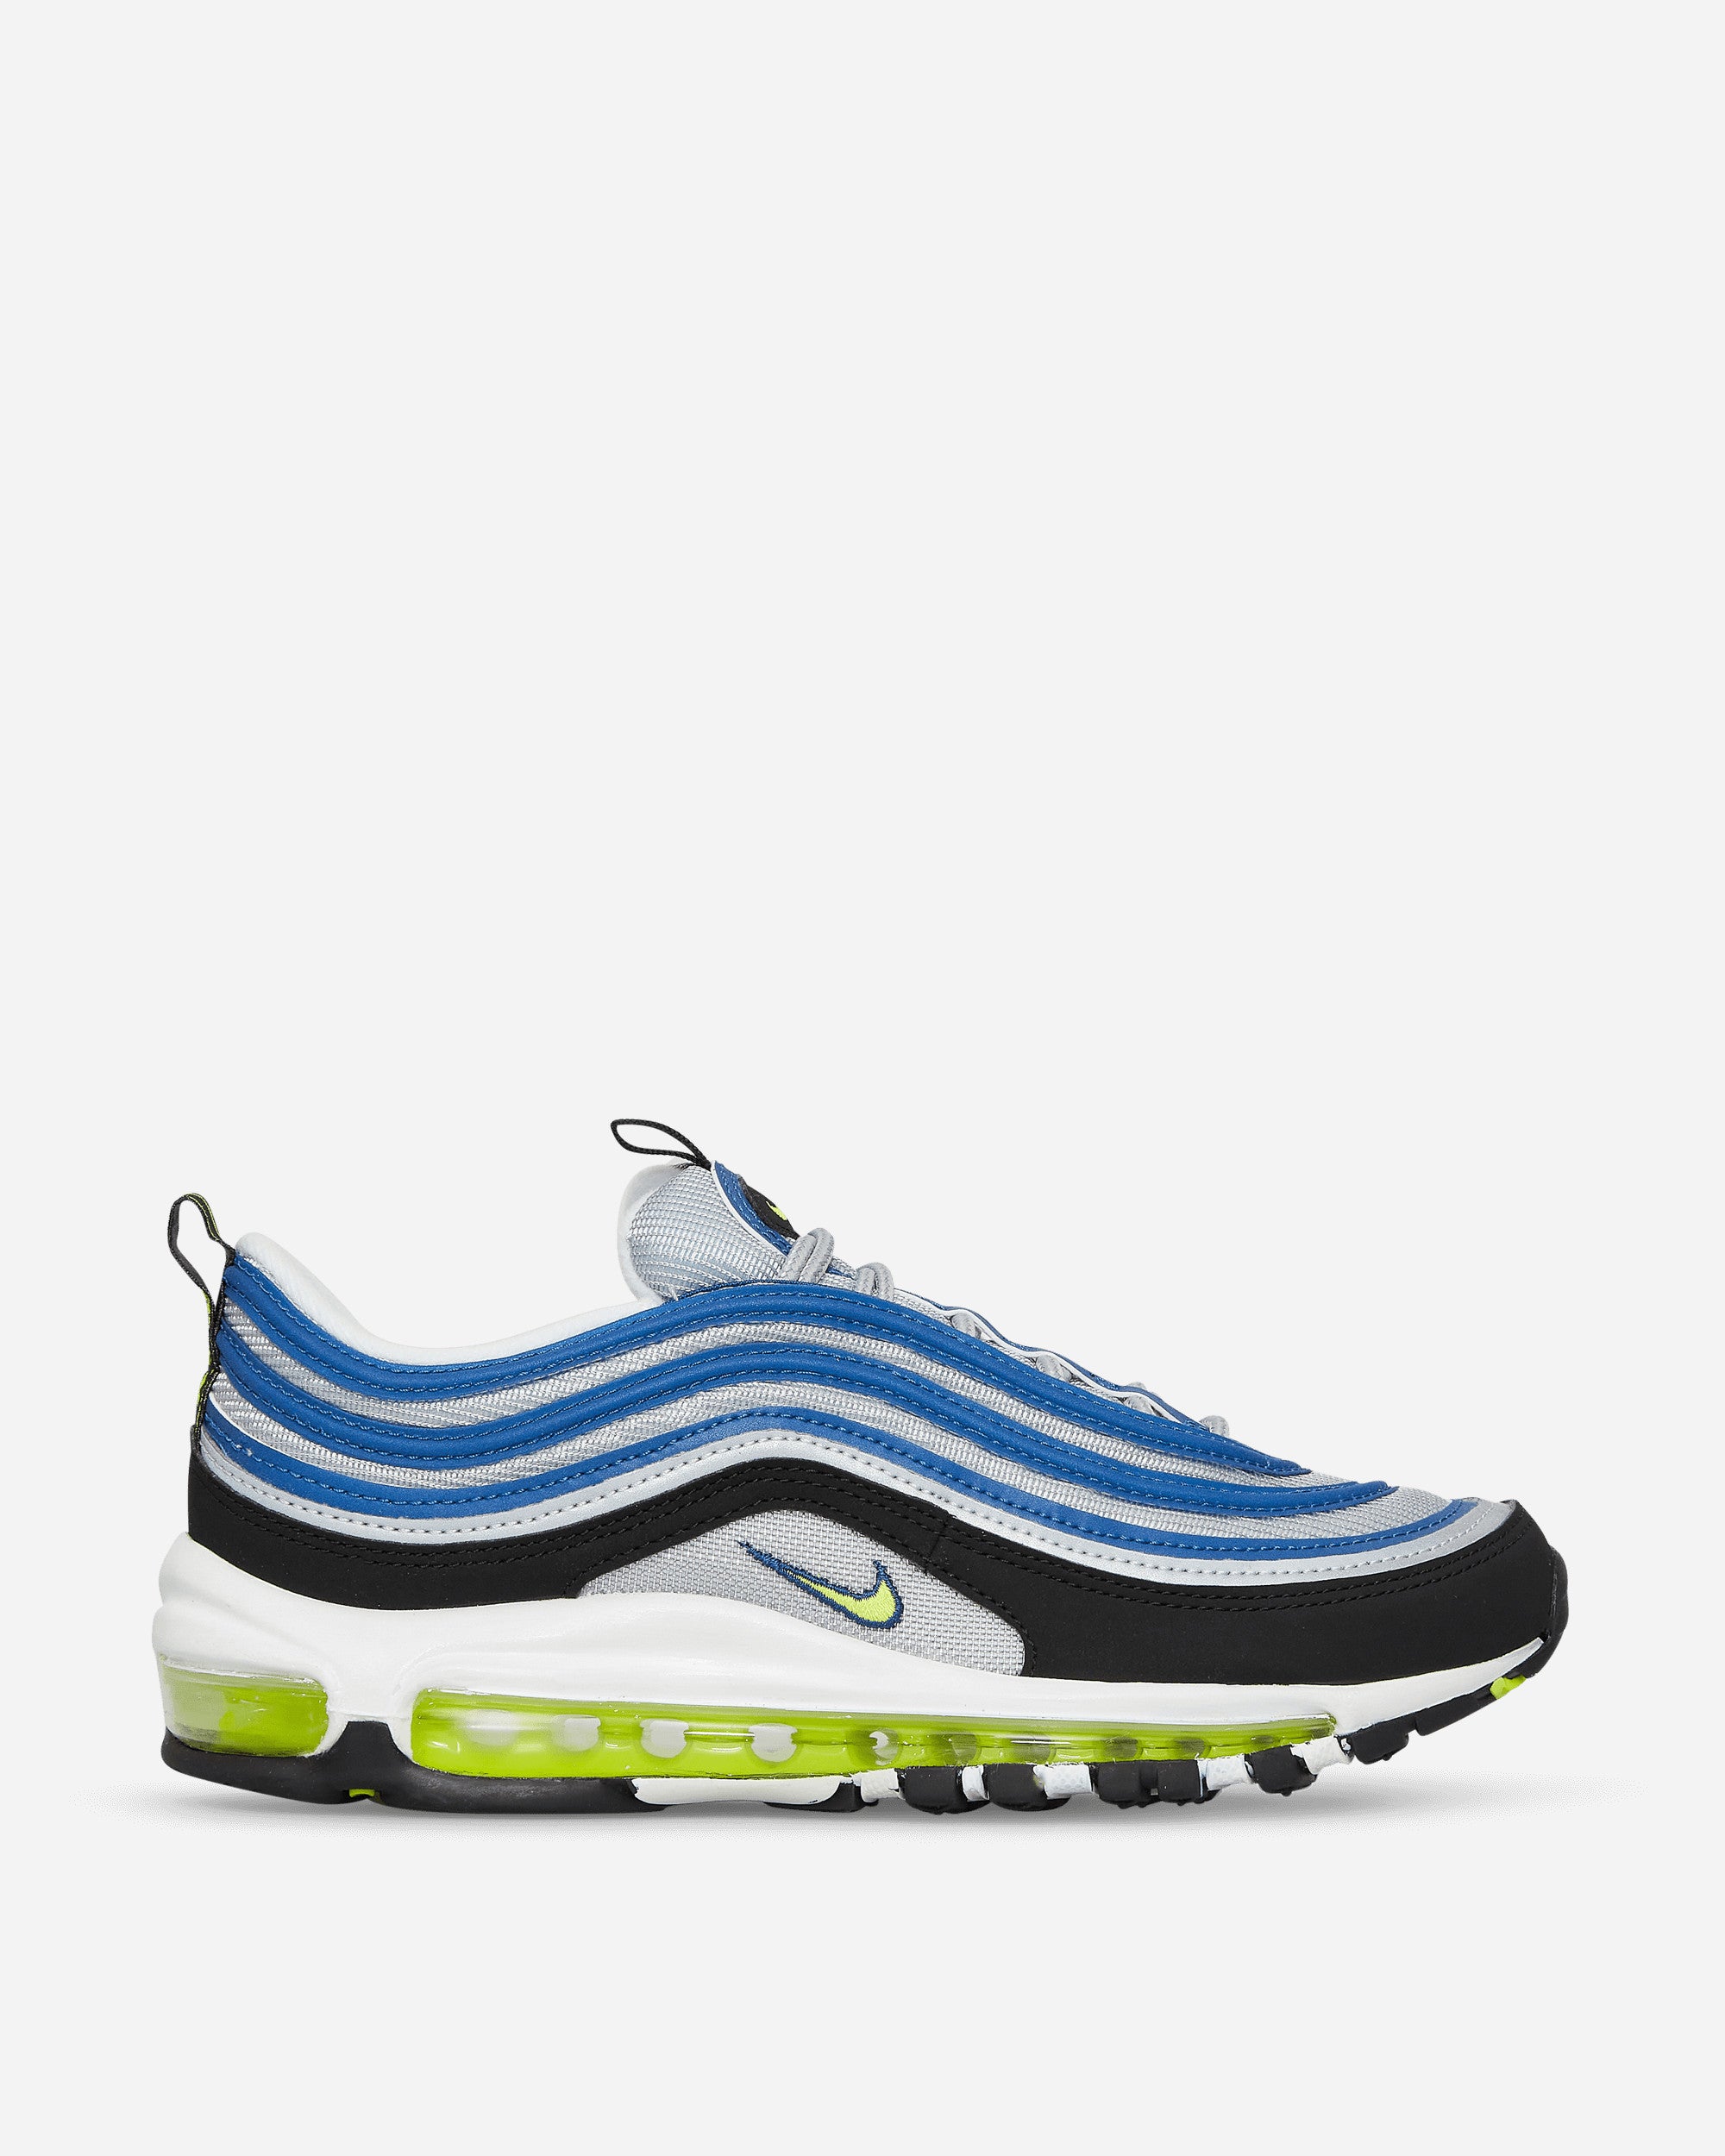 Nike Wmns Air Max 97 Og Atlantic Blue/Voltage Yellow Sneakers Low DQ9131-400